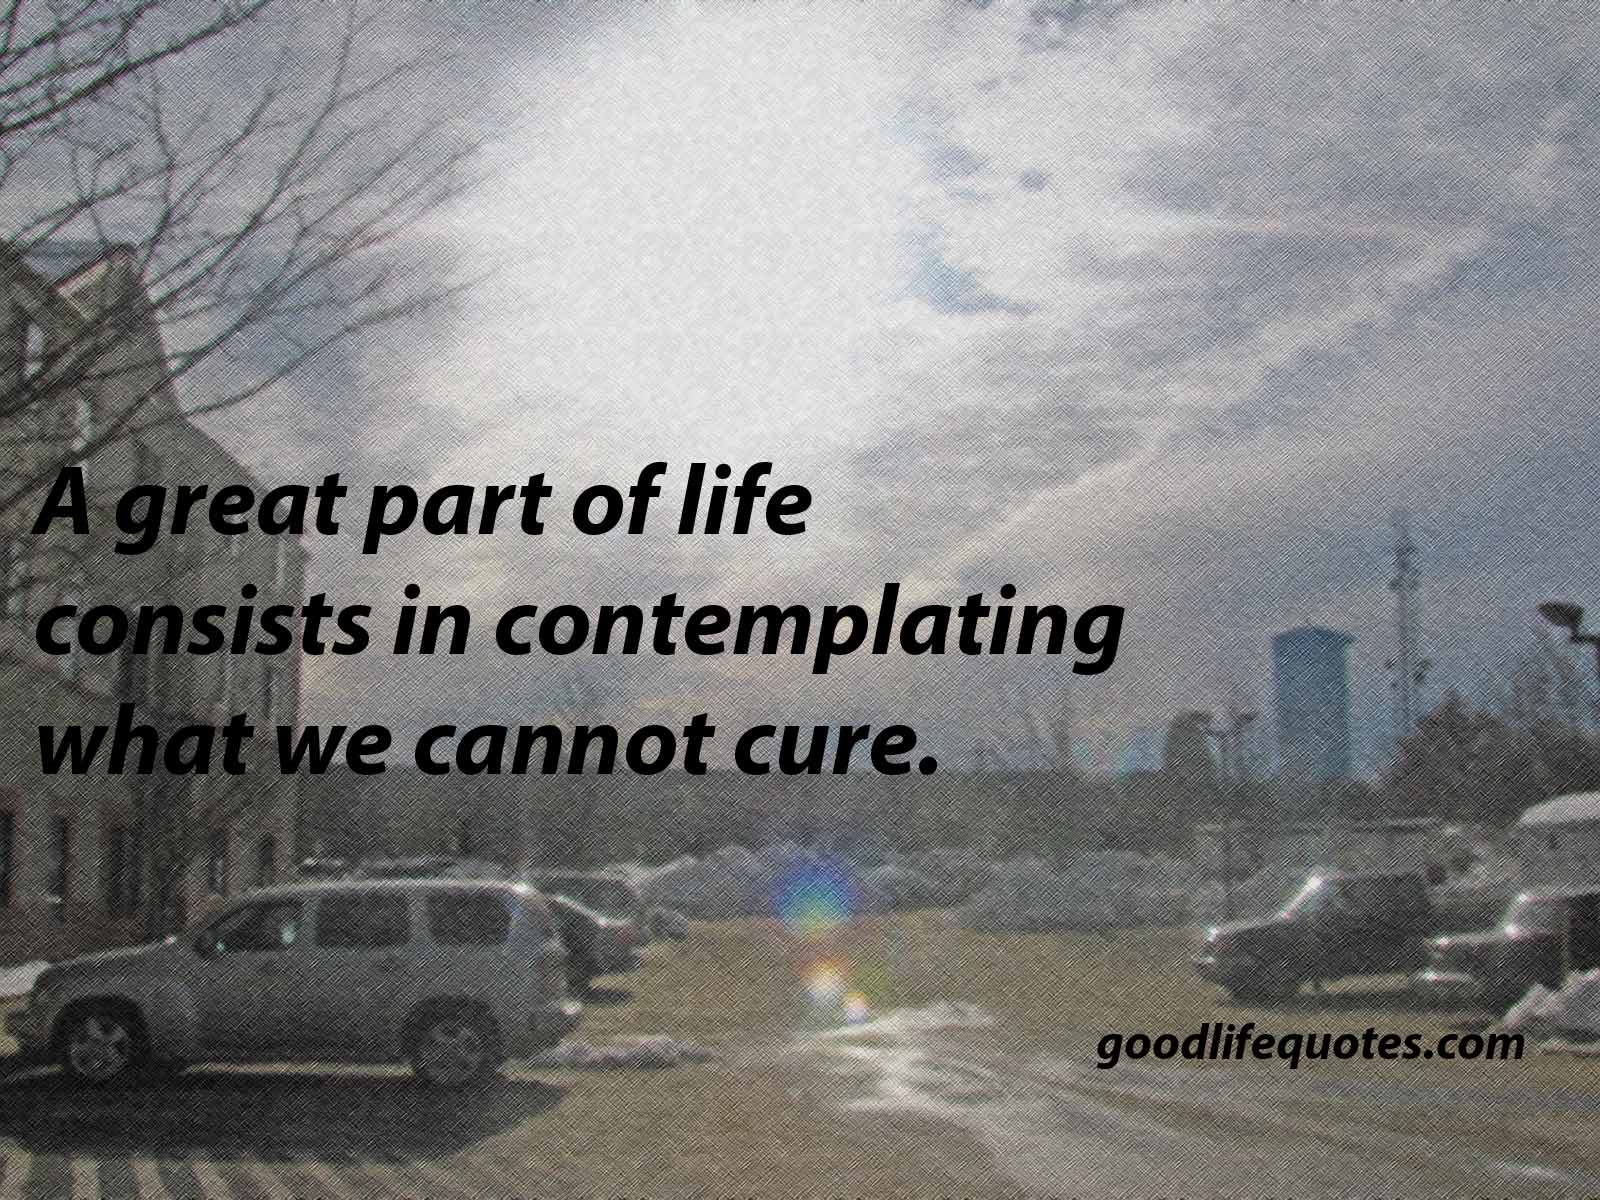 good life quotes 11 a great part of life consists in contemplating